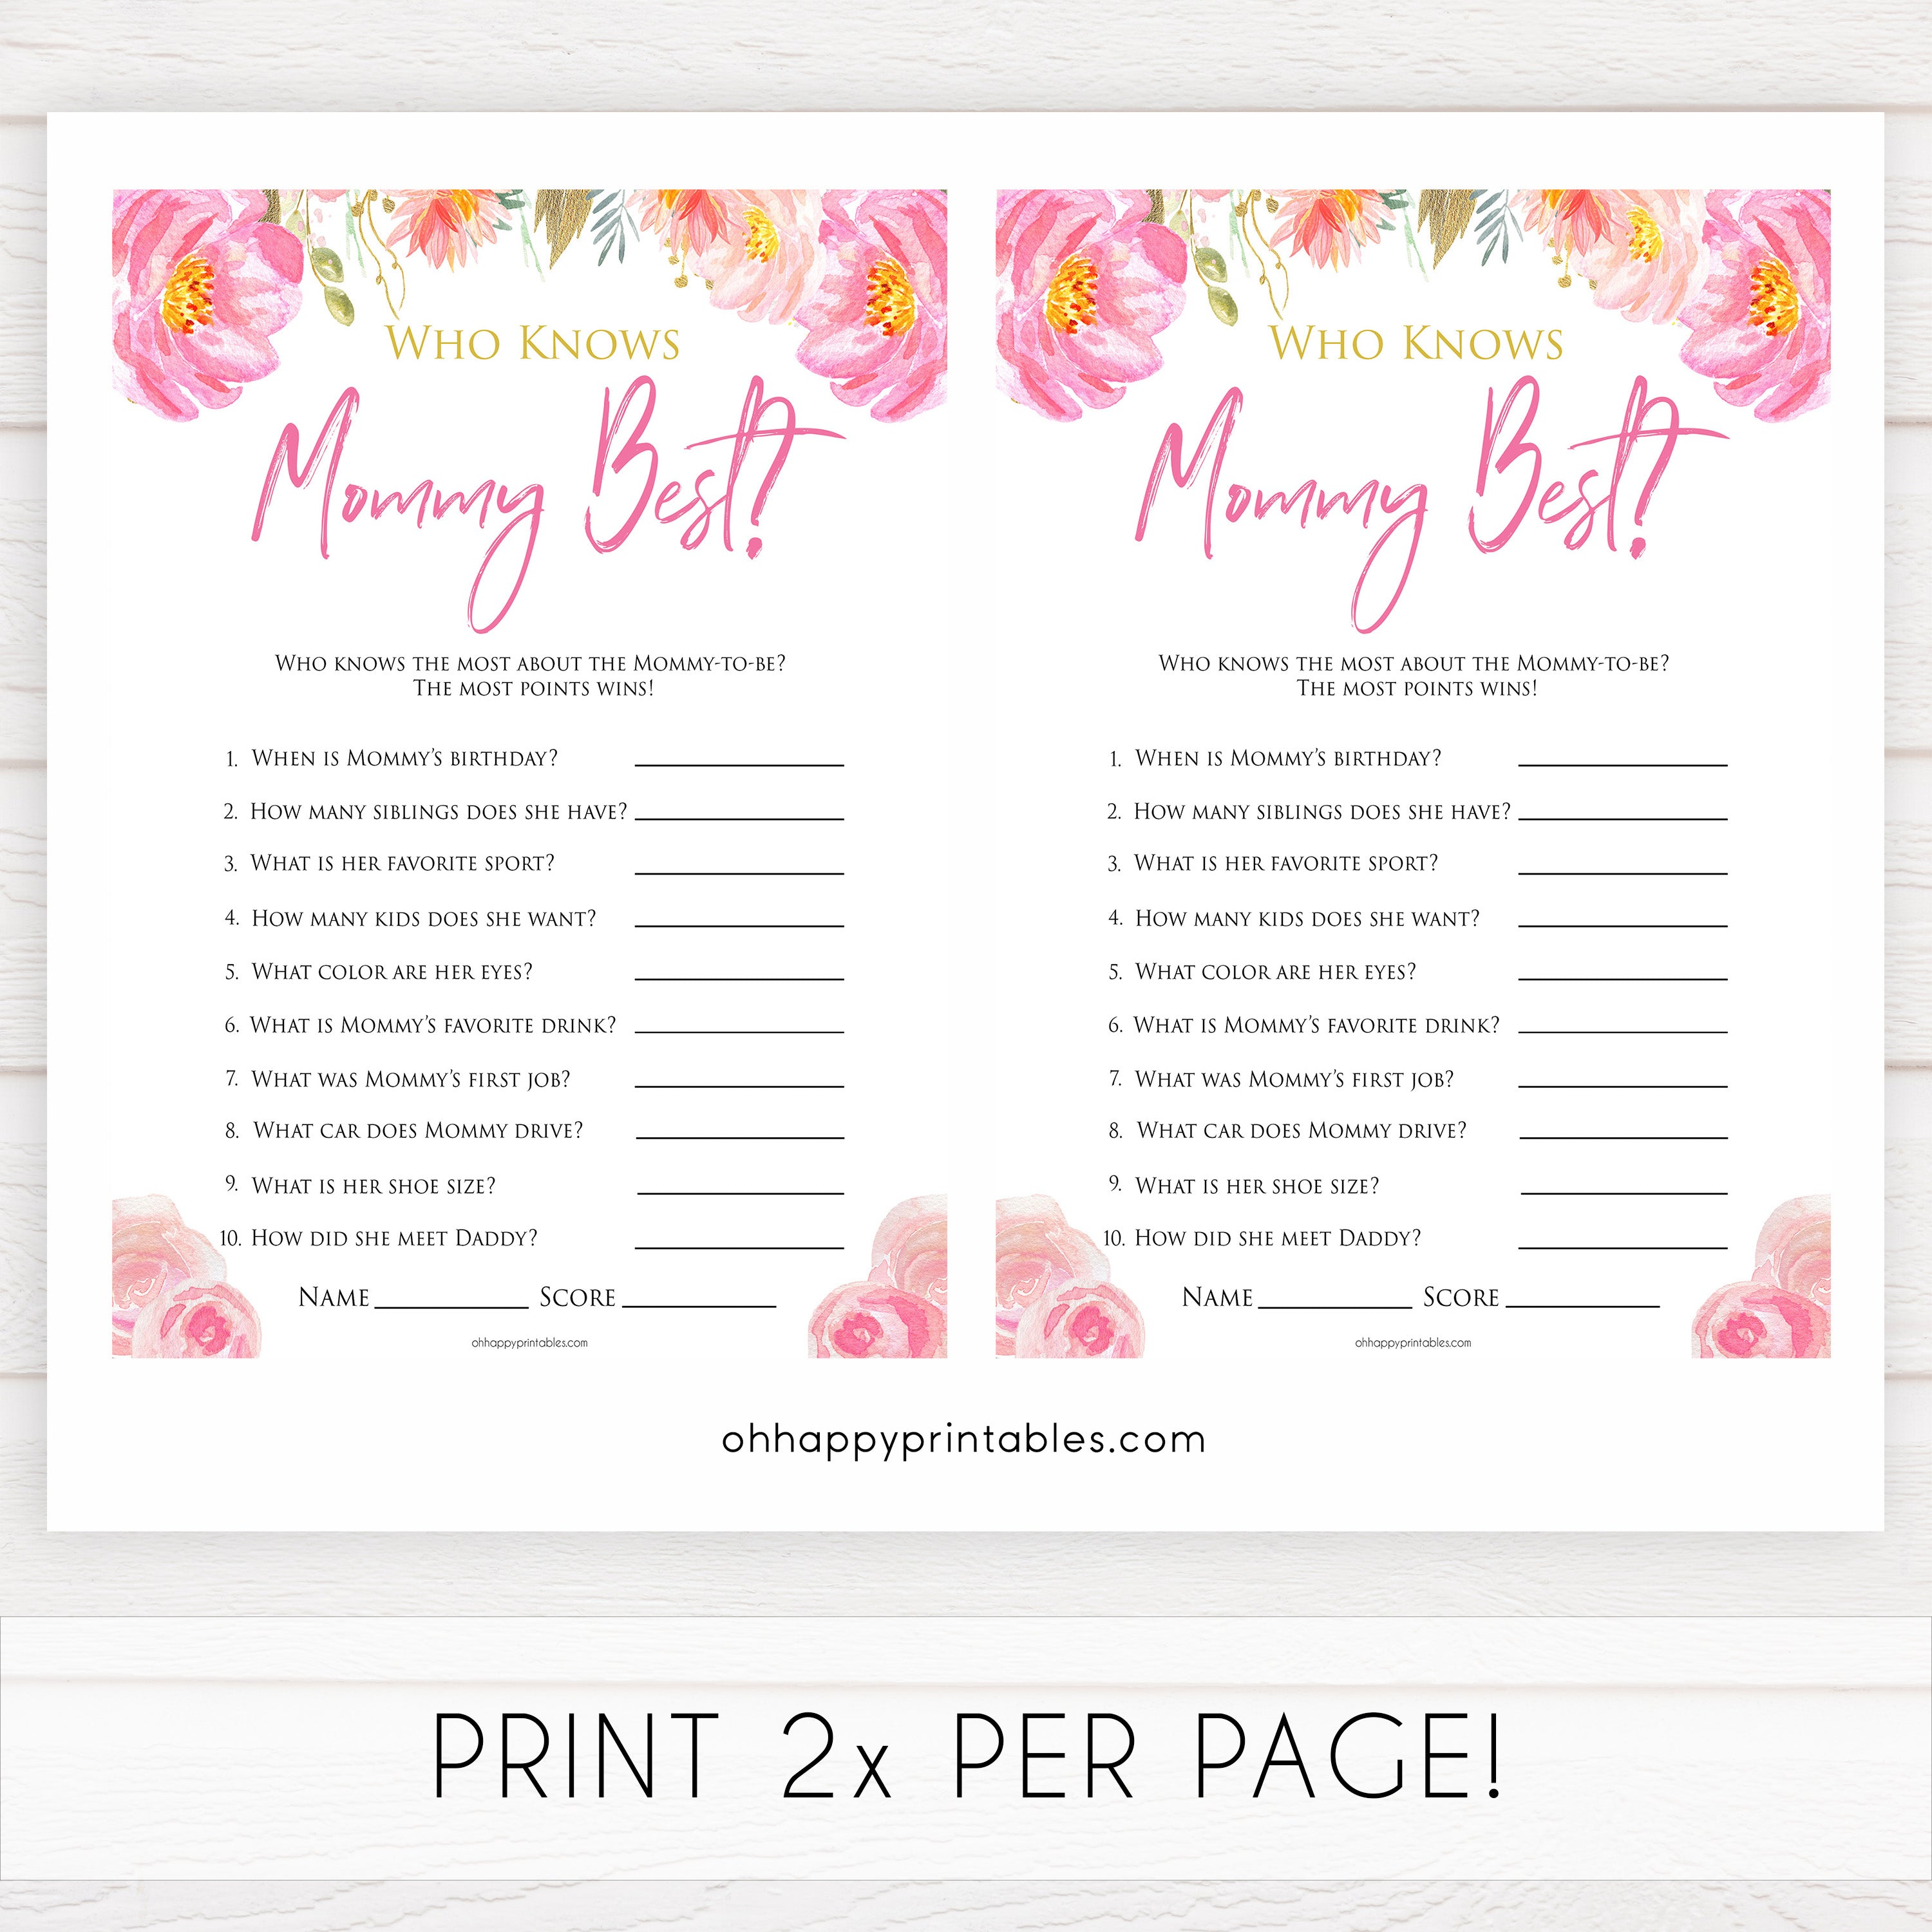 Pink blush floral baby shower who knows mommy best, who knows mummy best game, printable baby games, baby shower games, blush baby shower, floral baby games, girl baby shower ideas, pink baby shower ideas, floral baby games, popular baby games, fun baby games